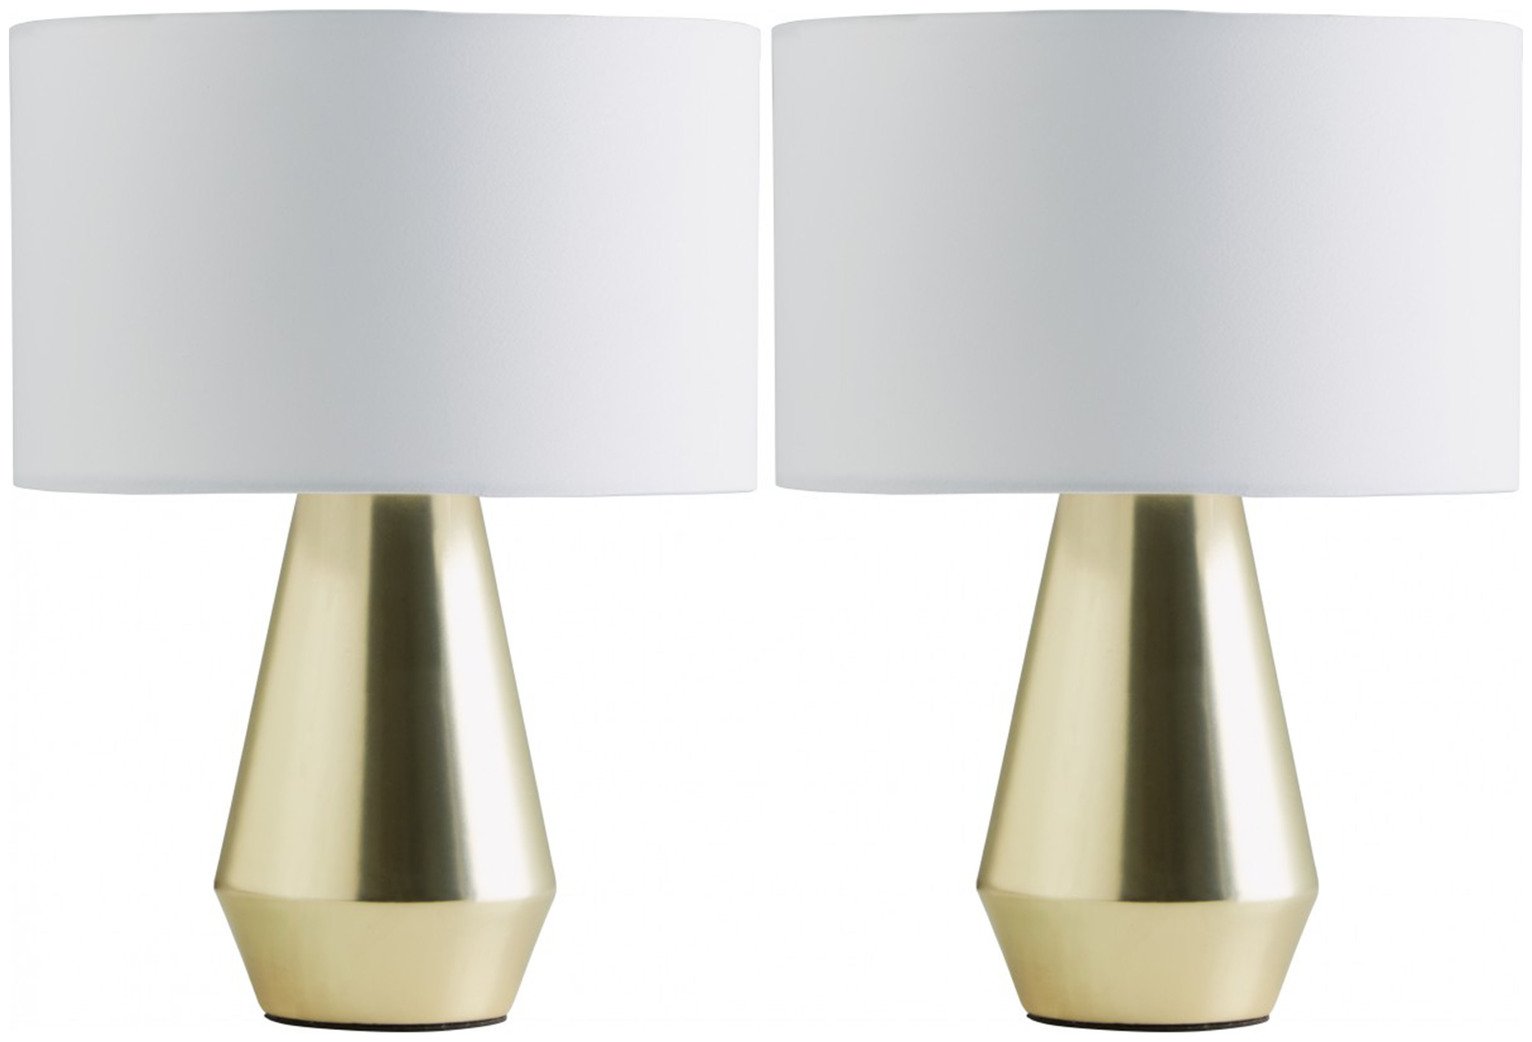 Habitat Maya Pair of Touch Table Lamps - Gold & White